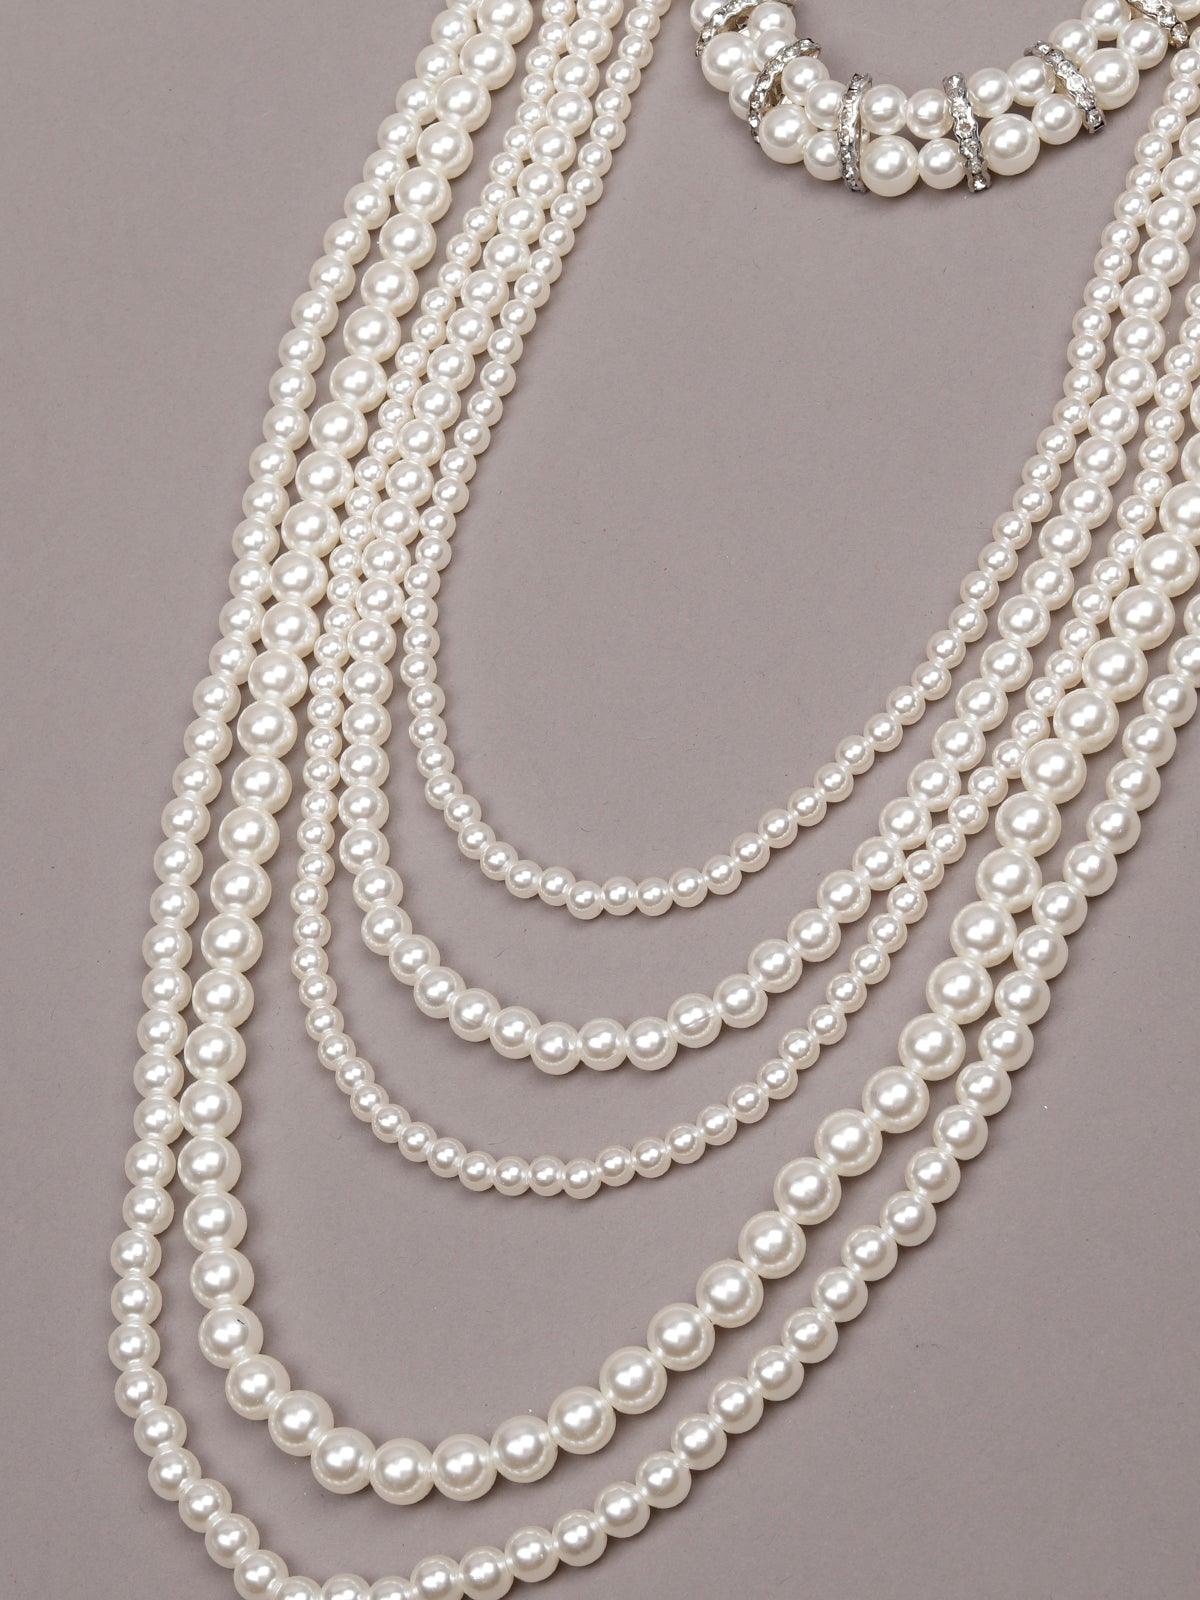 Women's Exquisite Long Overlapping Pearl Necklace - Odette